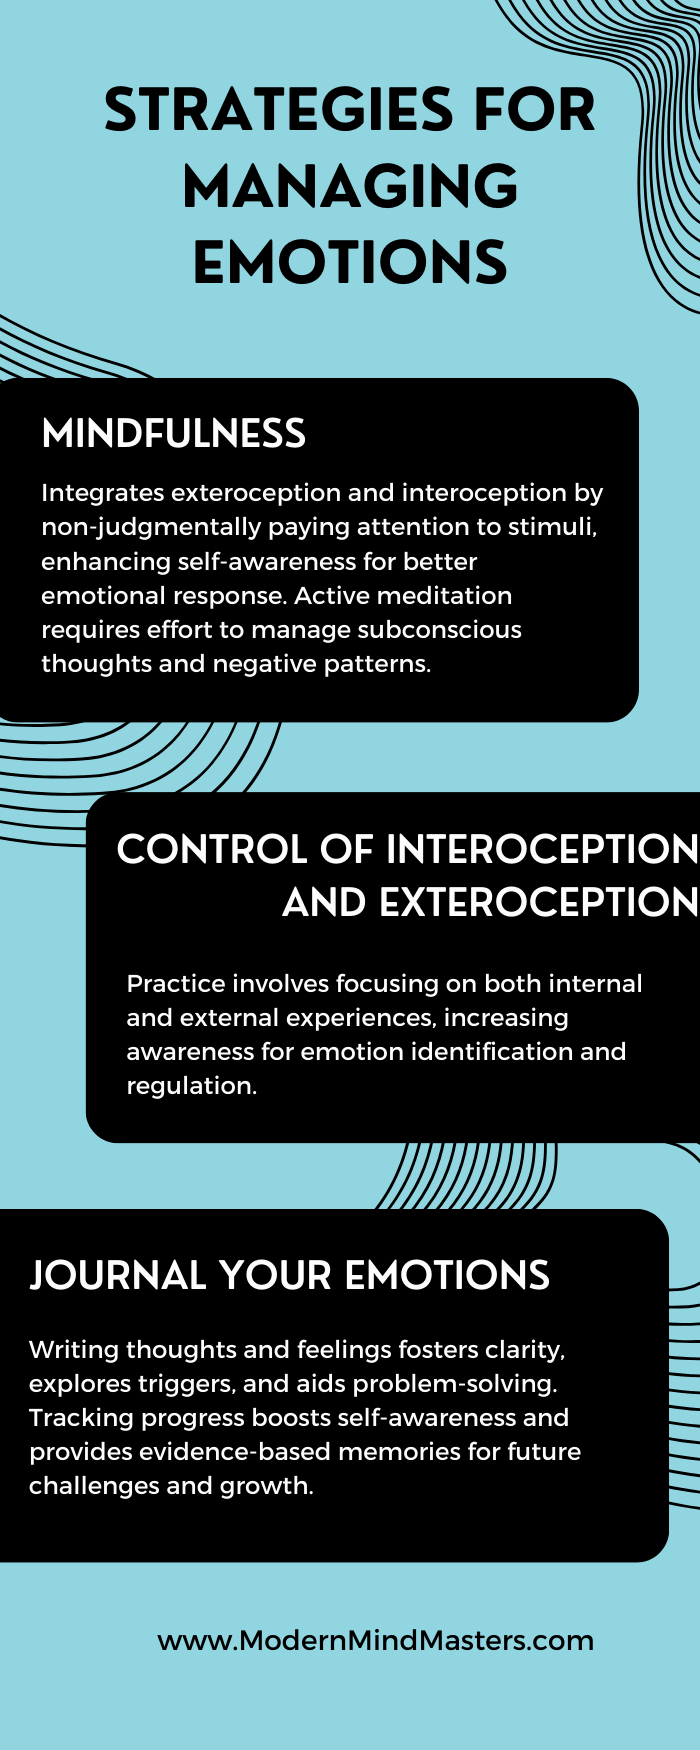 Strategies for managing emotions and improving emotional control.